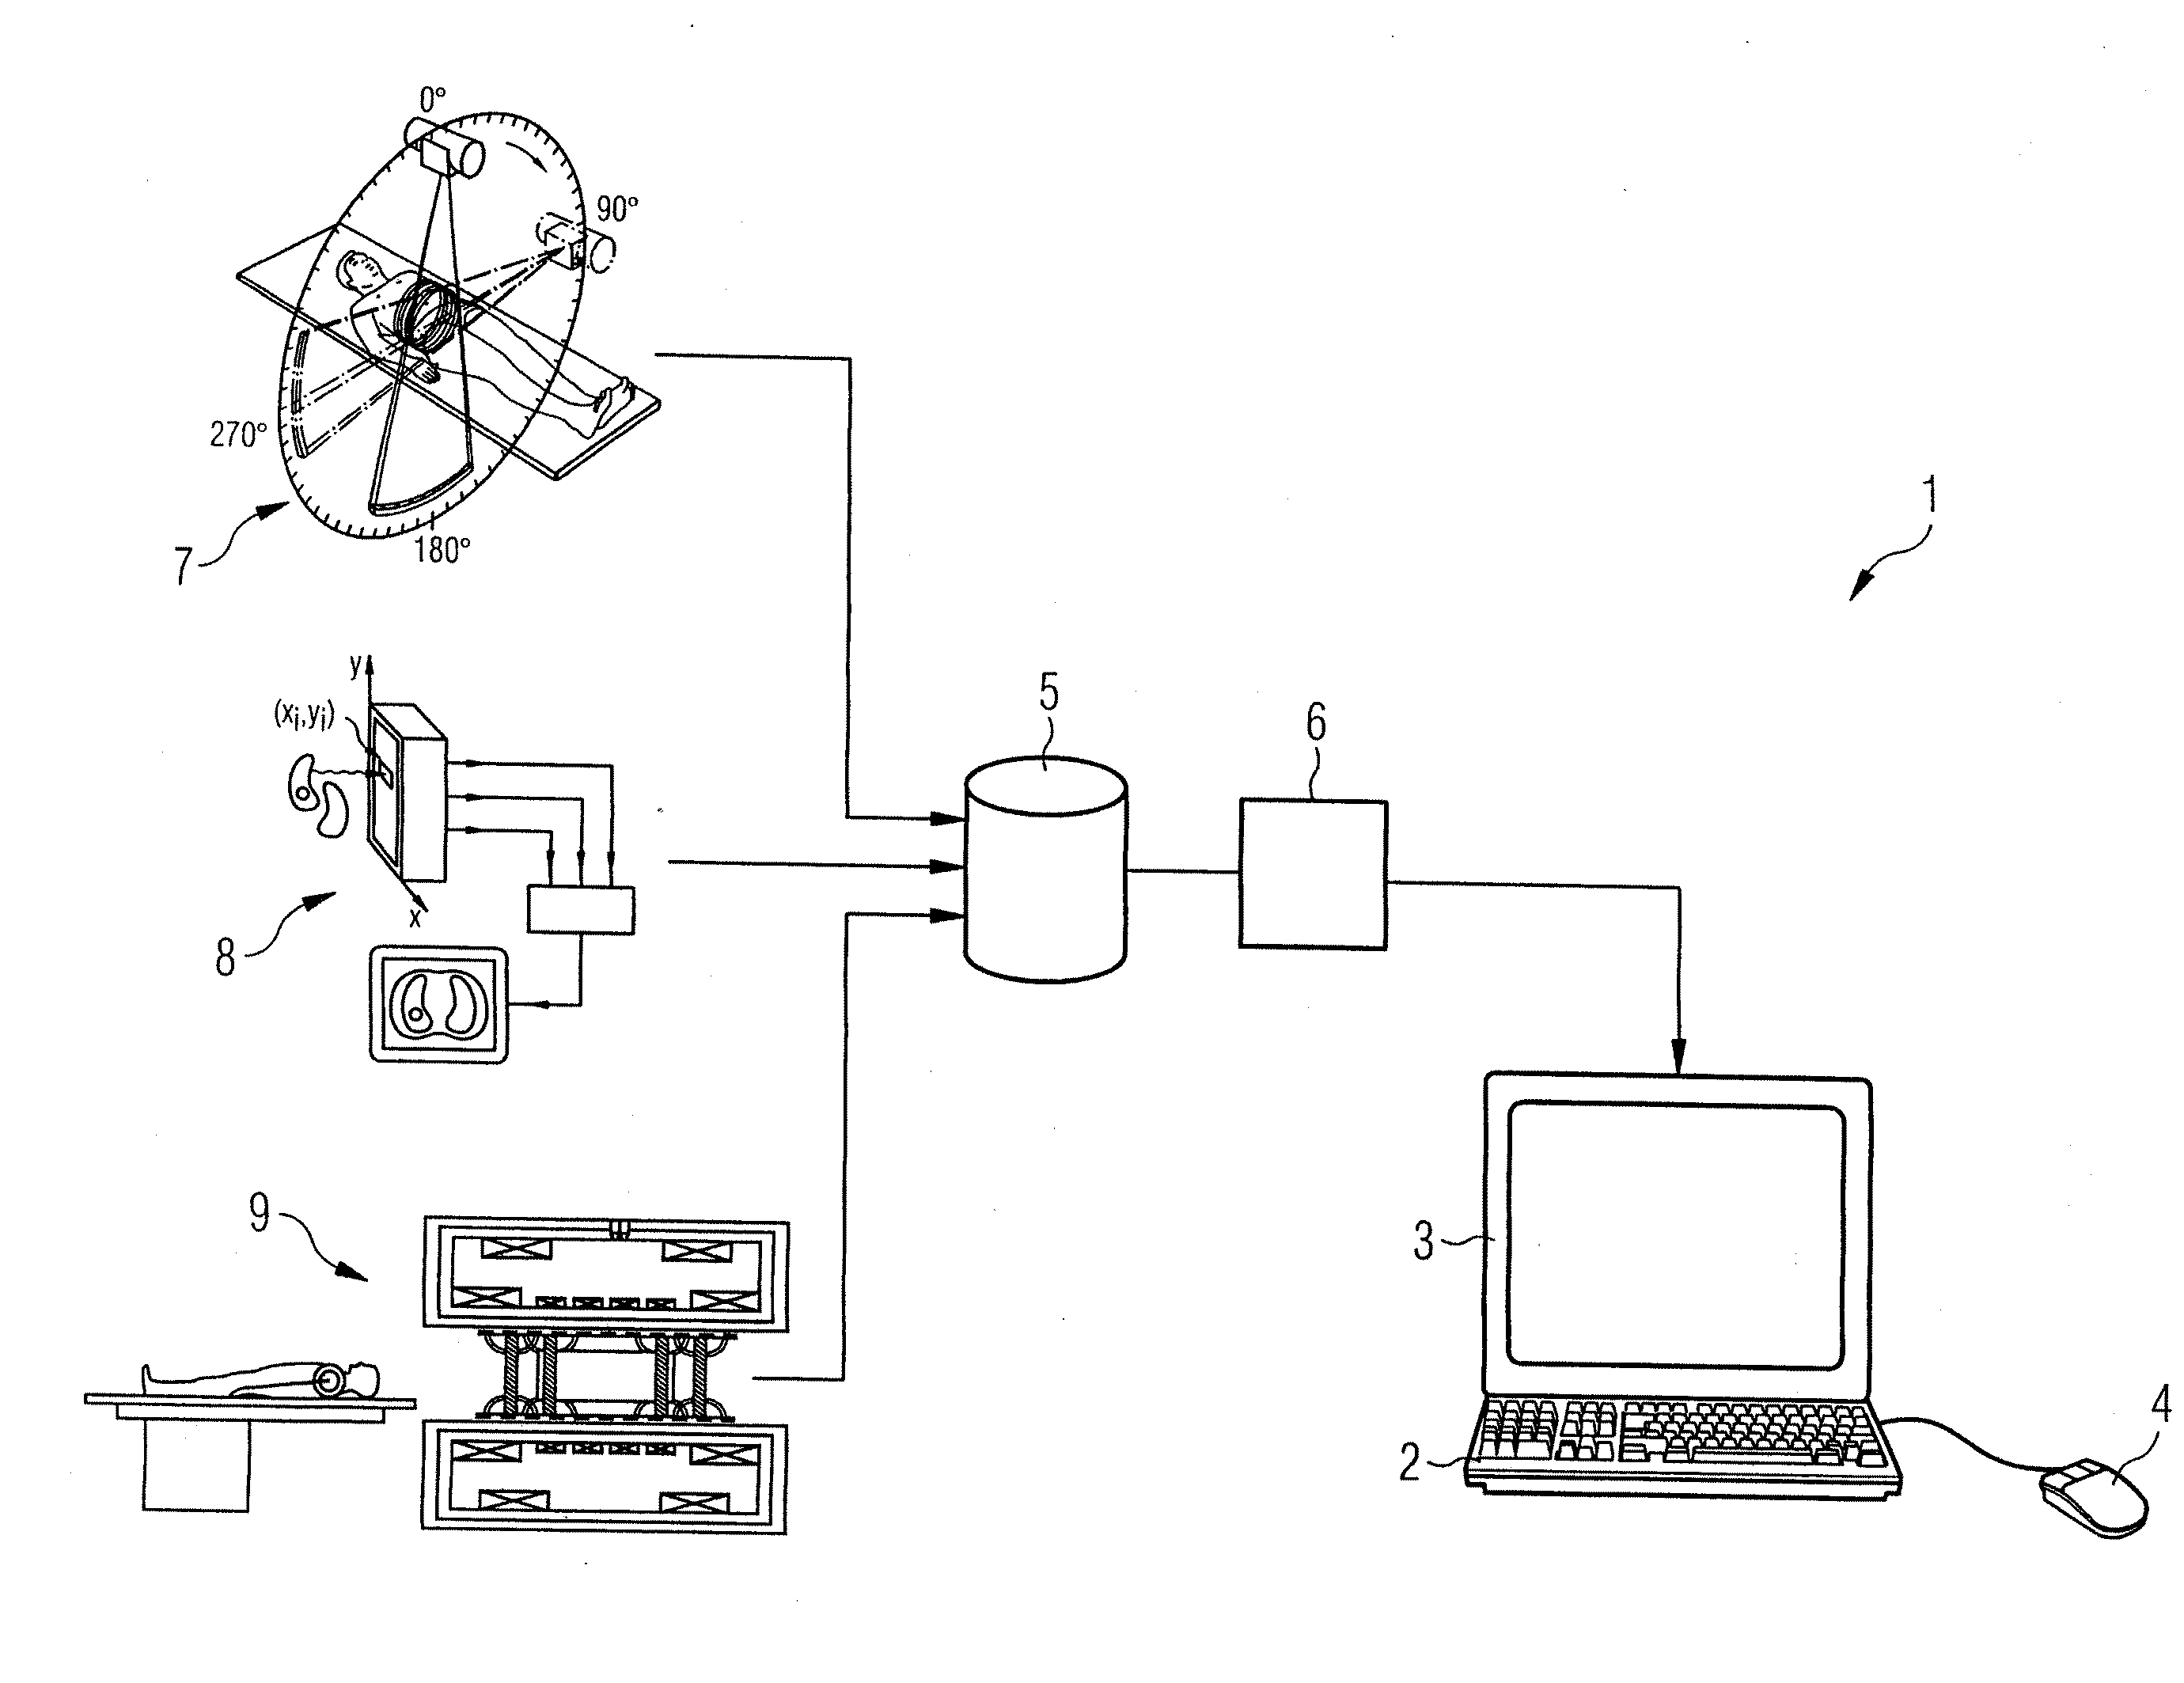 Method and user interface for the graphical presentation of medical data